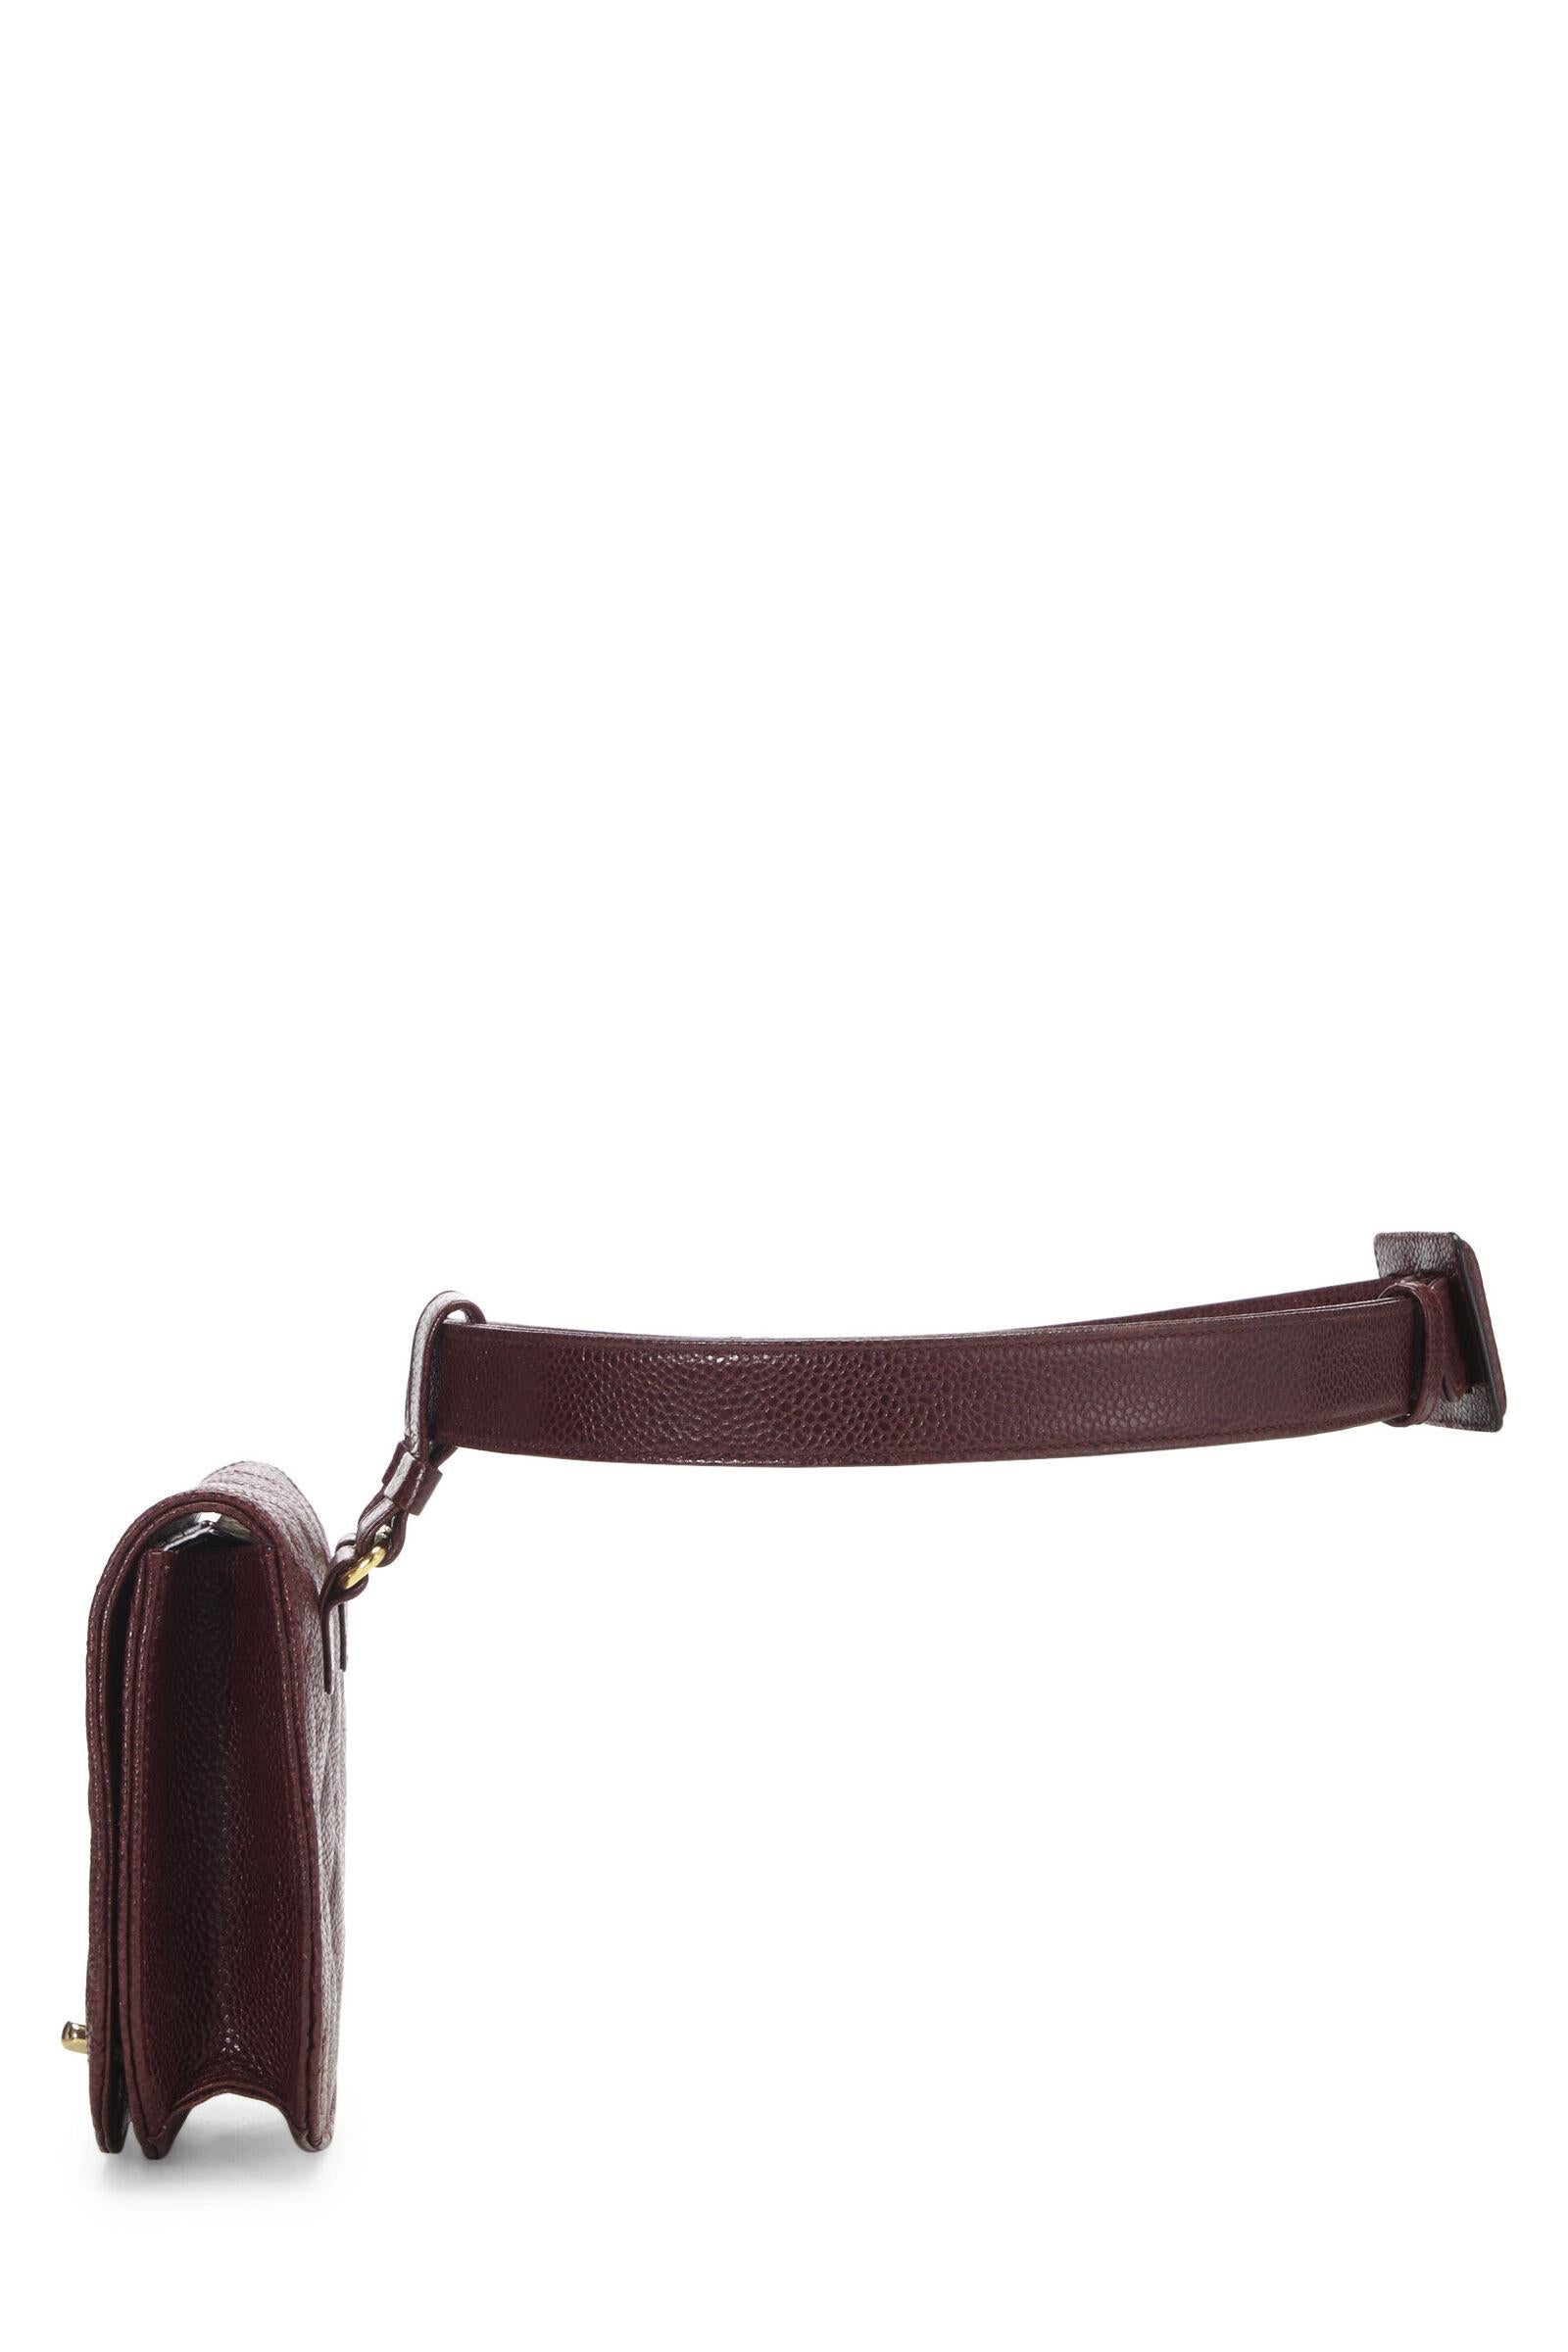 Chanel 1991 Classic Flap Red Burgundy Quilted Caviar Waist Belt Bag For Sale 1